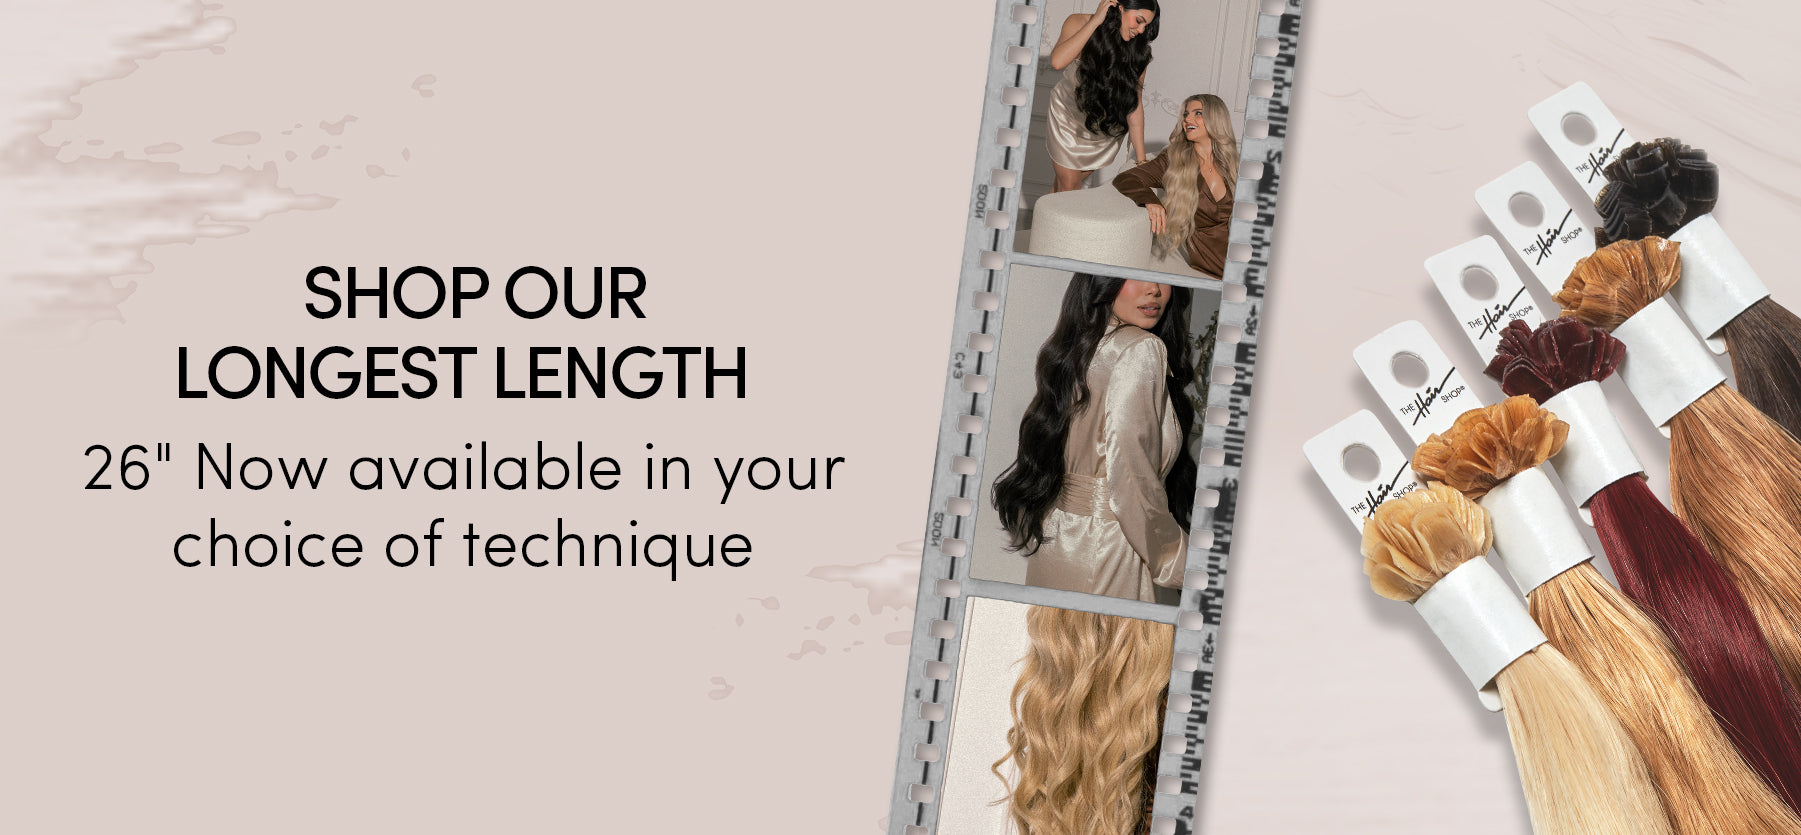 Shop our longest length | 26" now available in your choice of technique